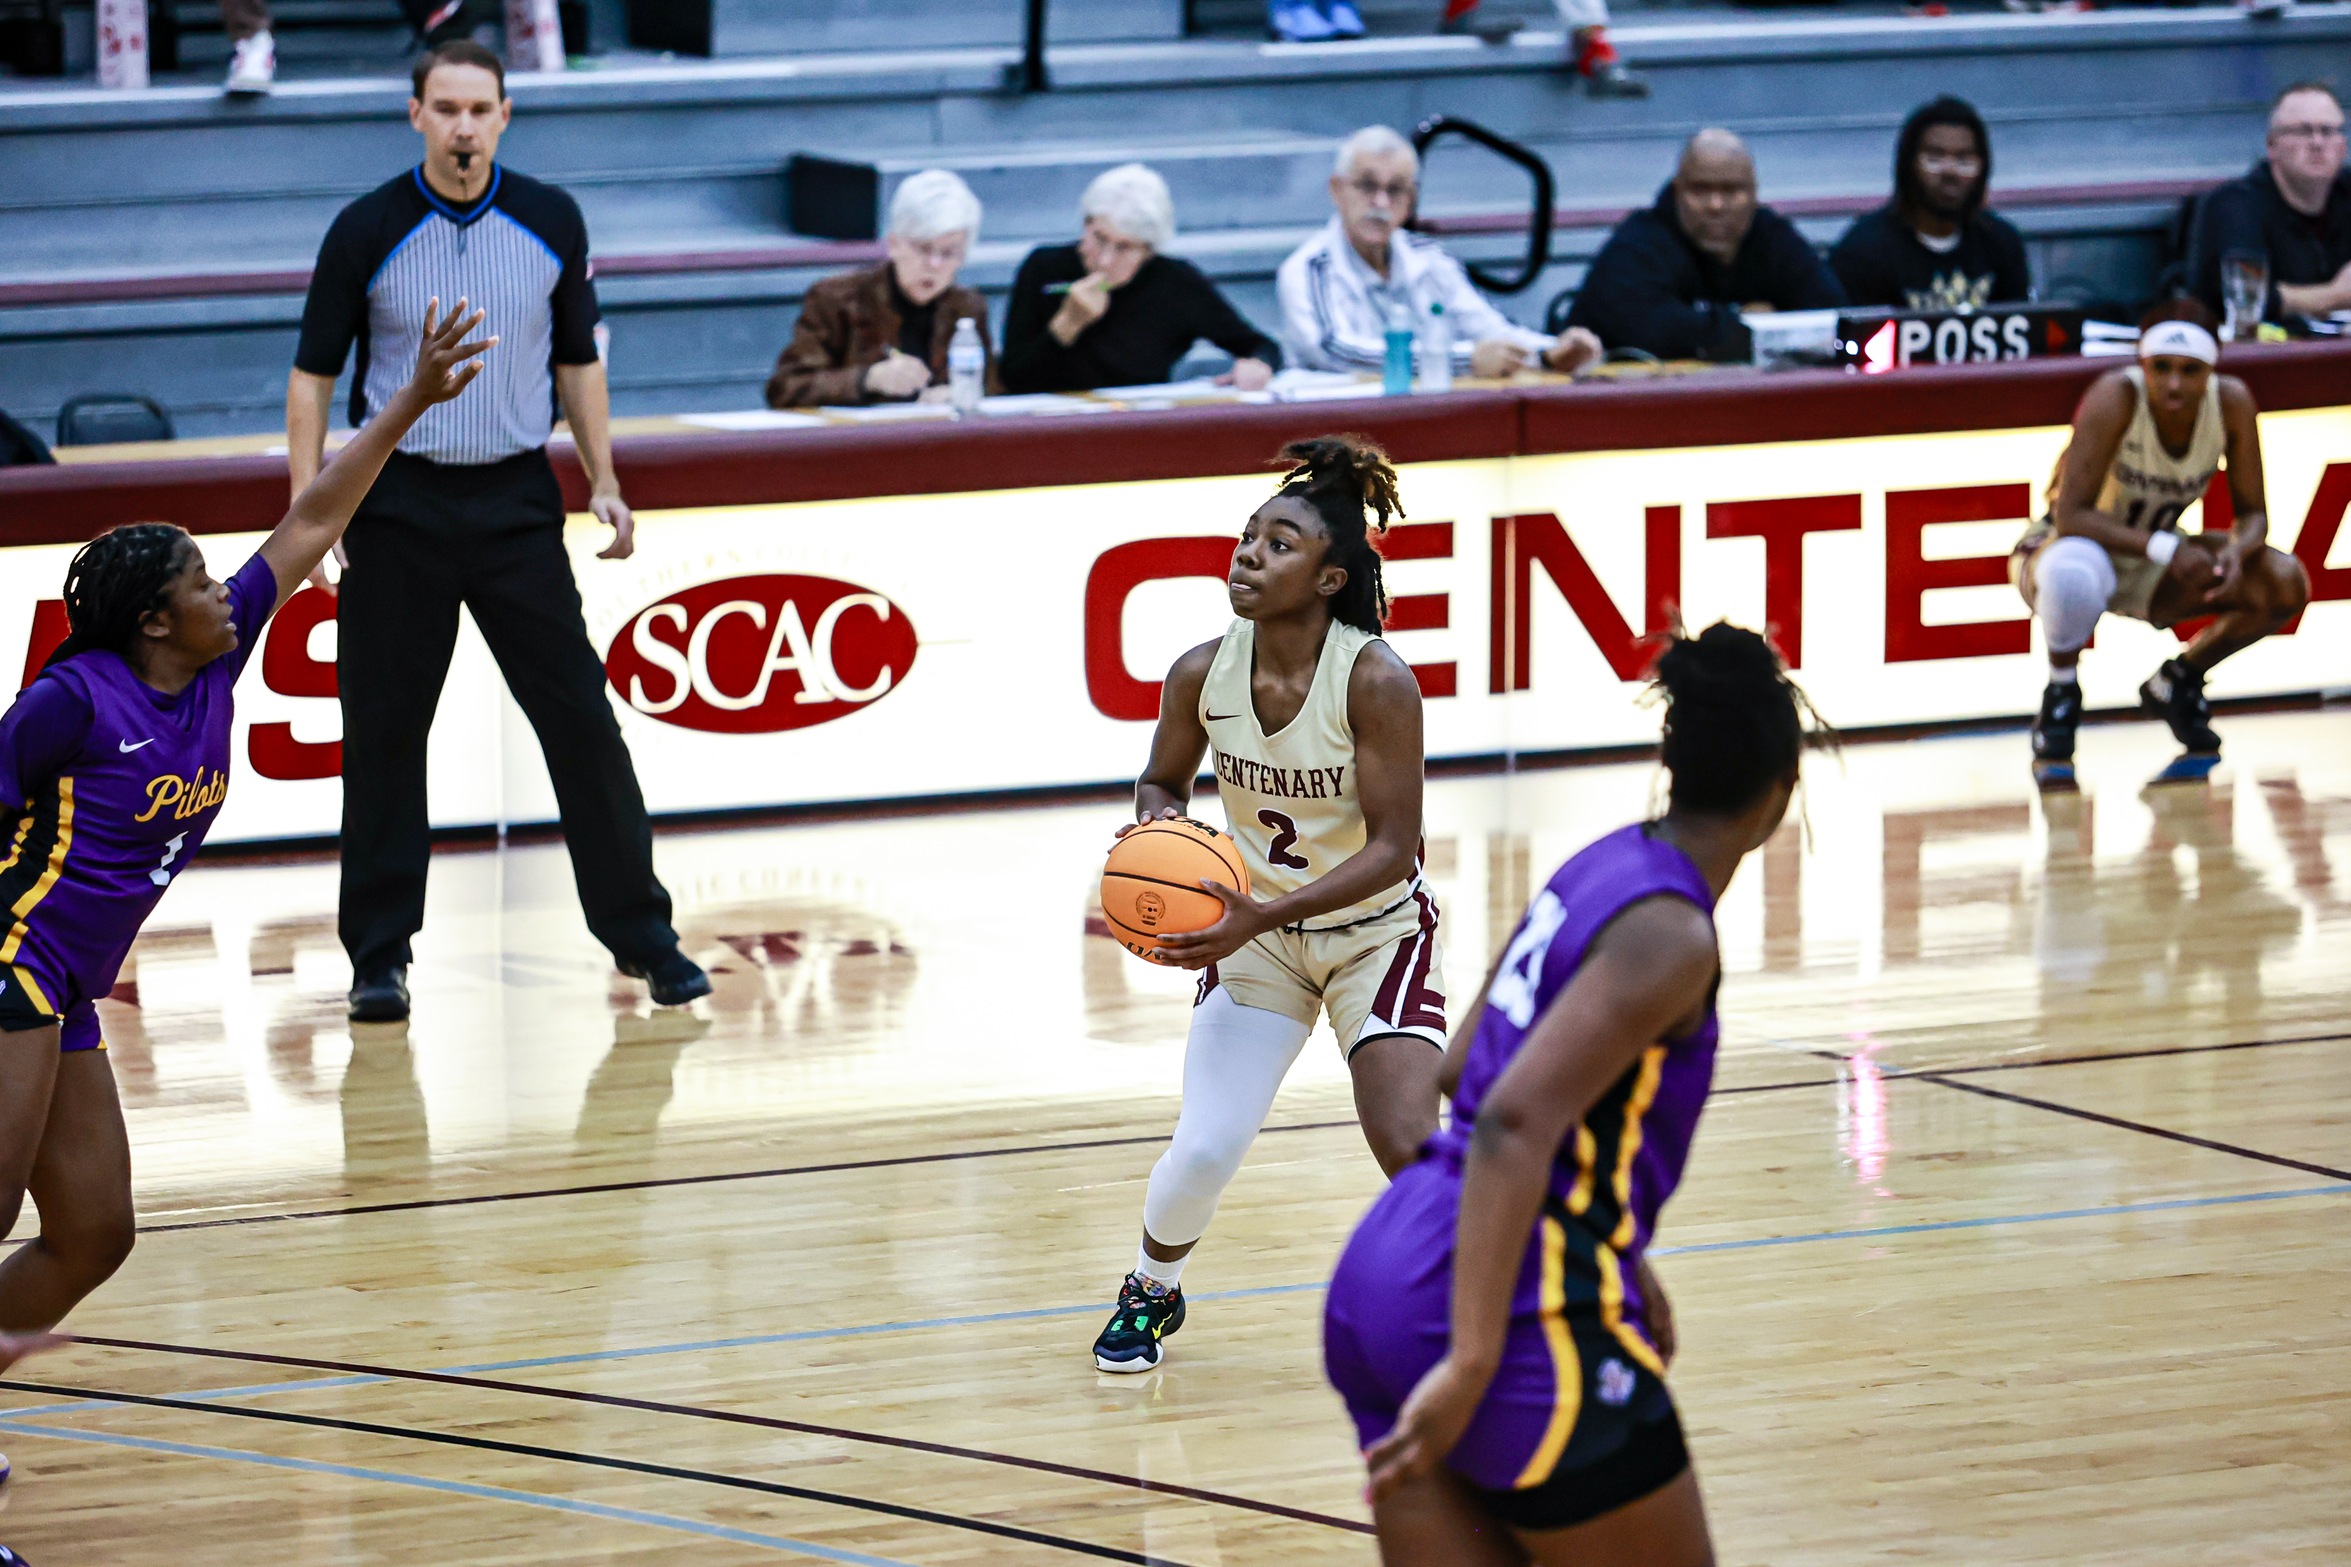 The Ladies fell at McNeese State in an exhibition contest on Thursday.